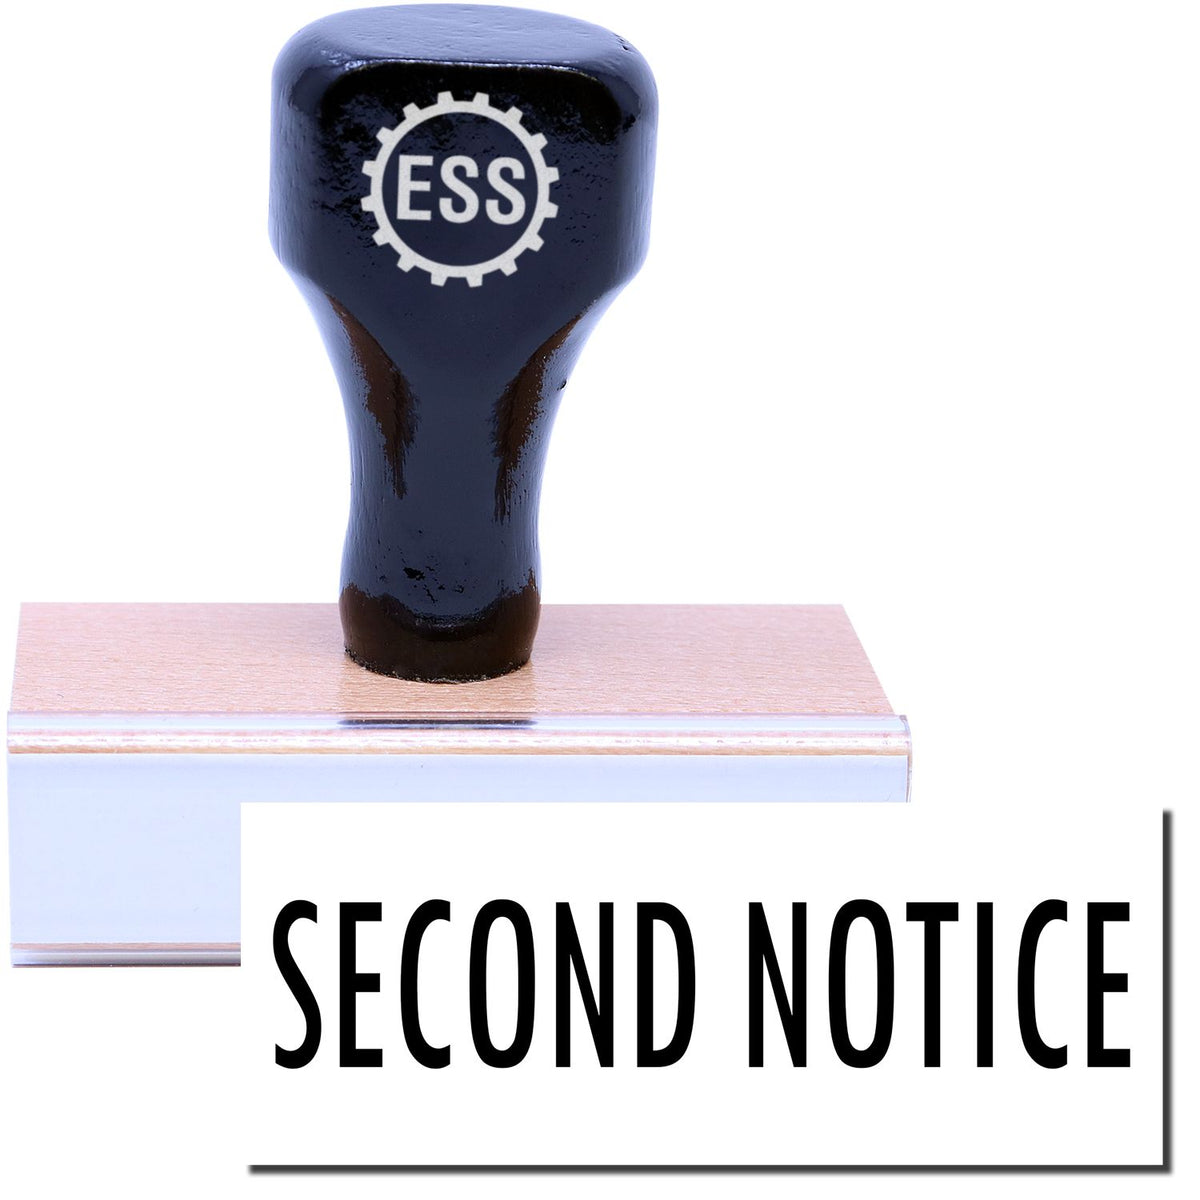 A stock office rubber stamp with a stamped image showing how the text &quot;SECOND NOTICE&quot; in a large font is displayed after stamping.